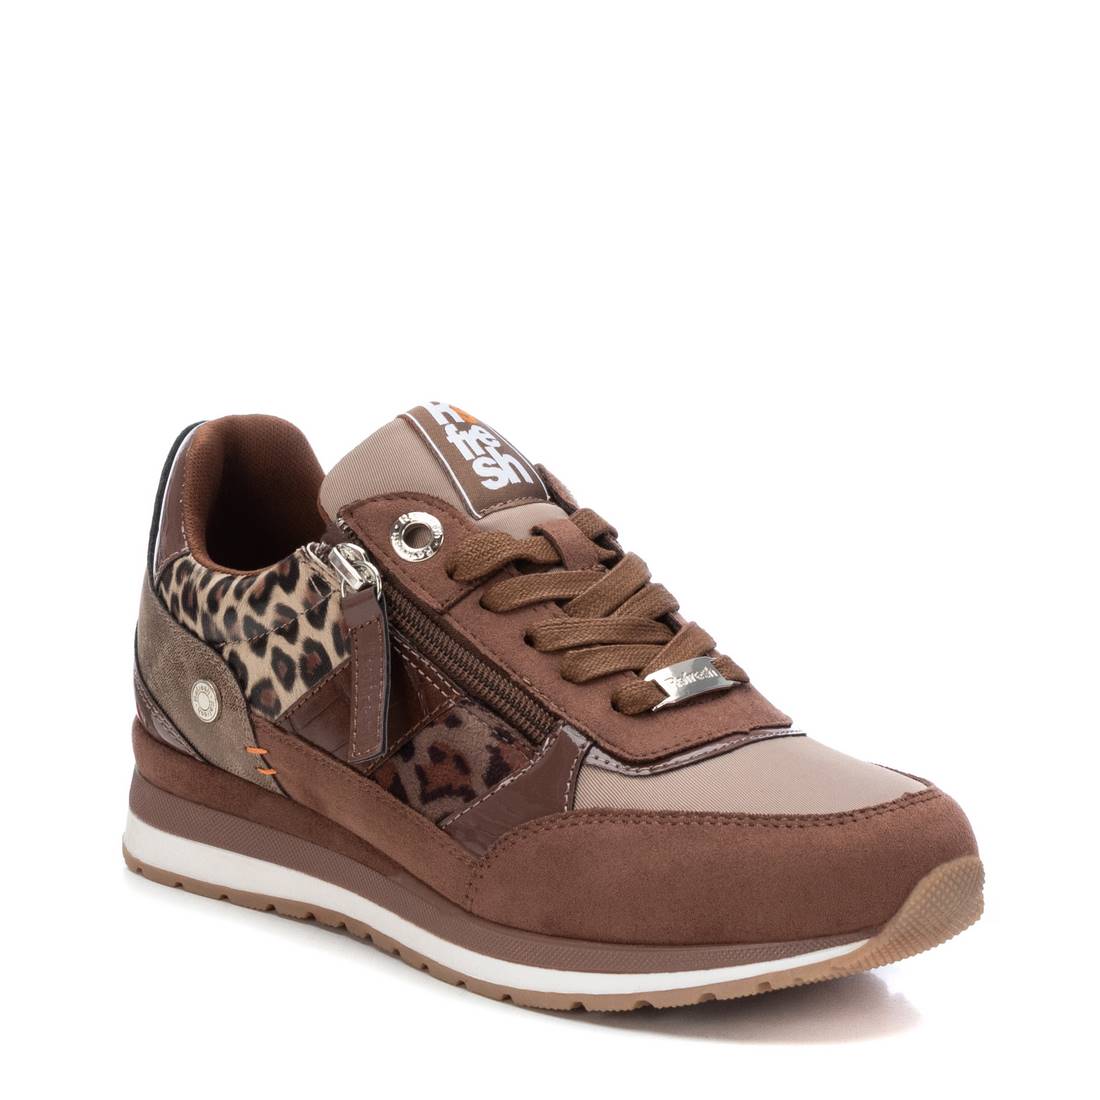 REFRESH - BROWN LEOPARD & TAUPE COMBINED TRAINER 171431